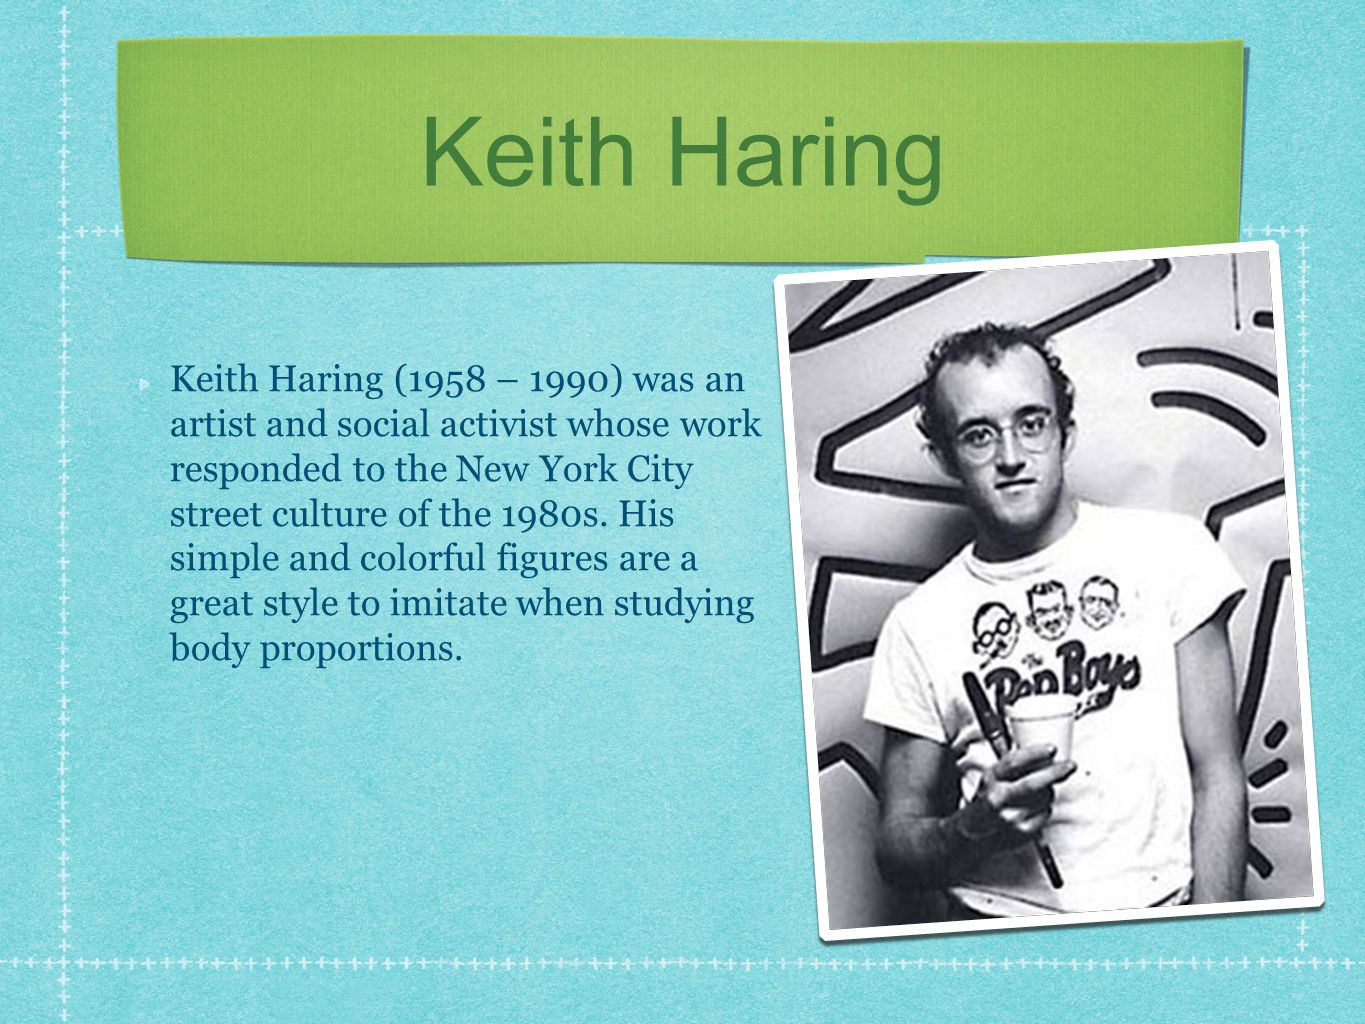 Keith Haring Keith Haring (1958 – 1990) was an artist and social activist whose work responded to the New York City street culture of the 1980s.